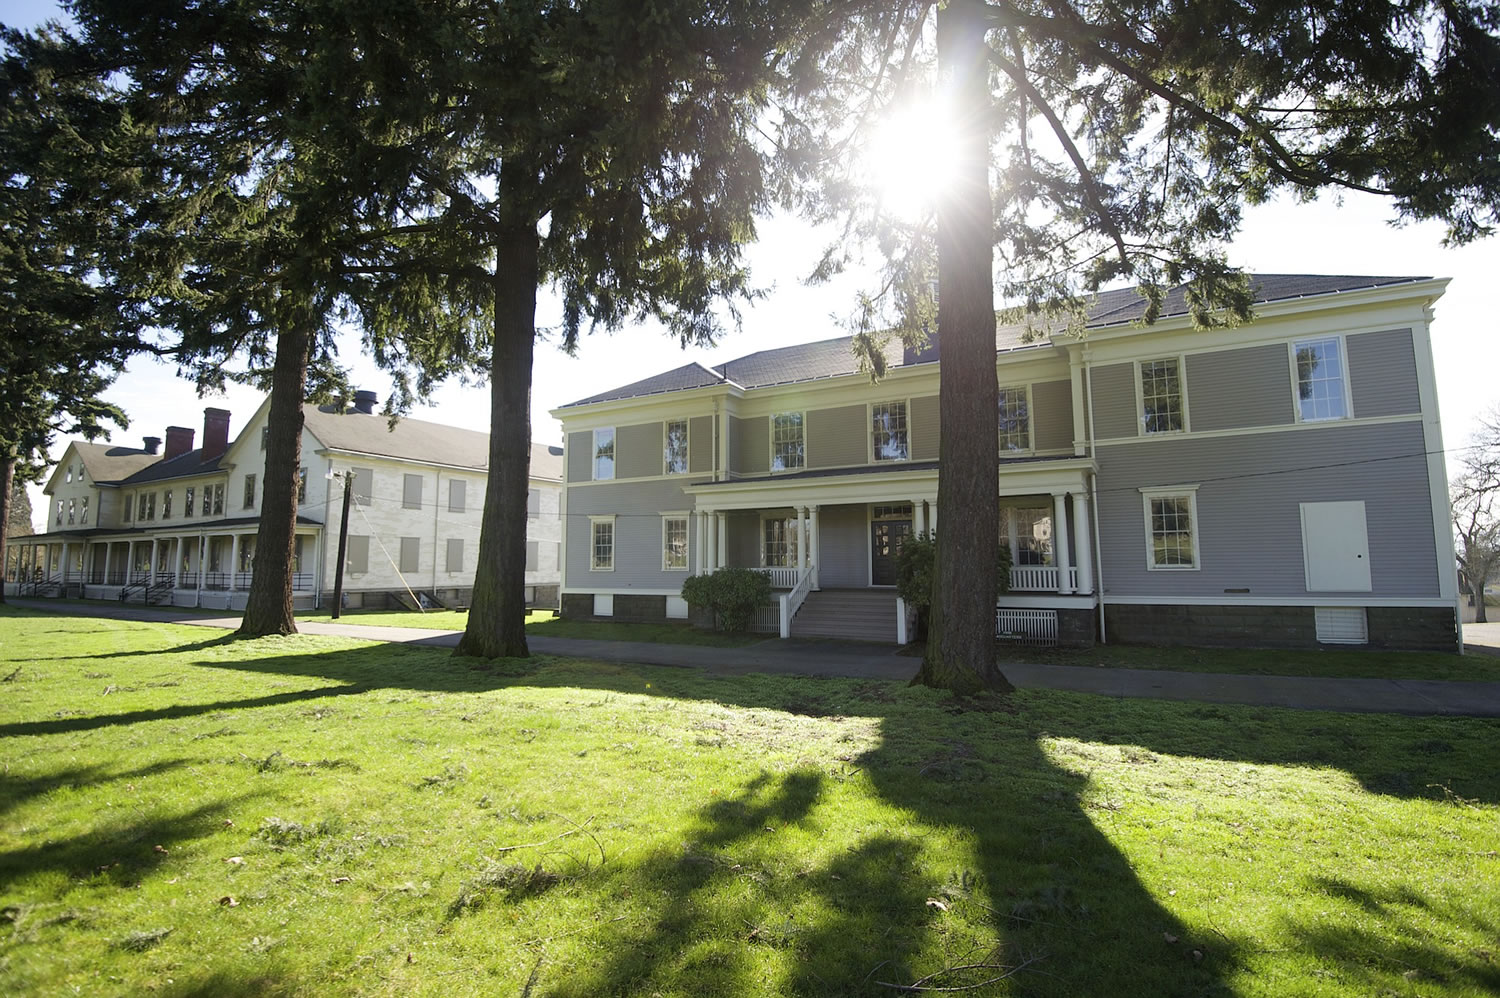 After a 2013 renovation of the Post Headquarters, right, Fort Vancouver National Historic Site anounced a rehab project for the infantry barracks, left, and two similar &quot;front row&quot; structures.